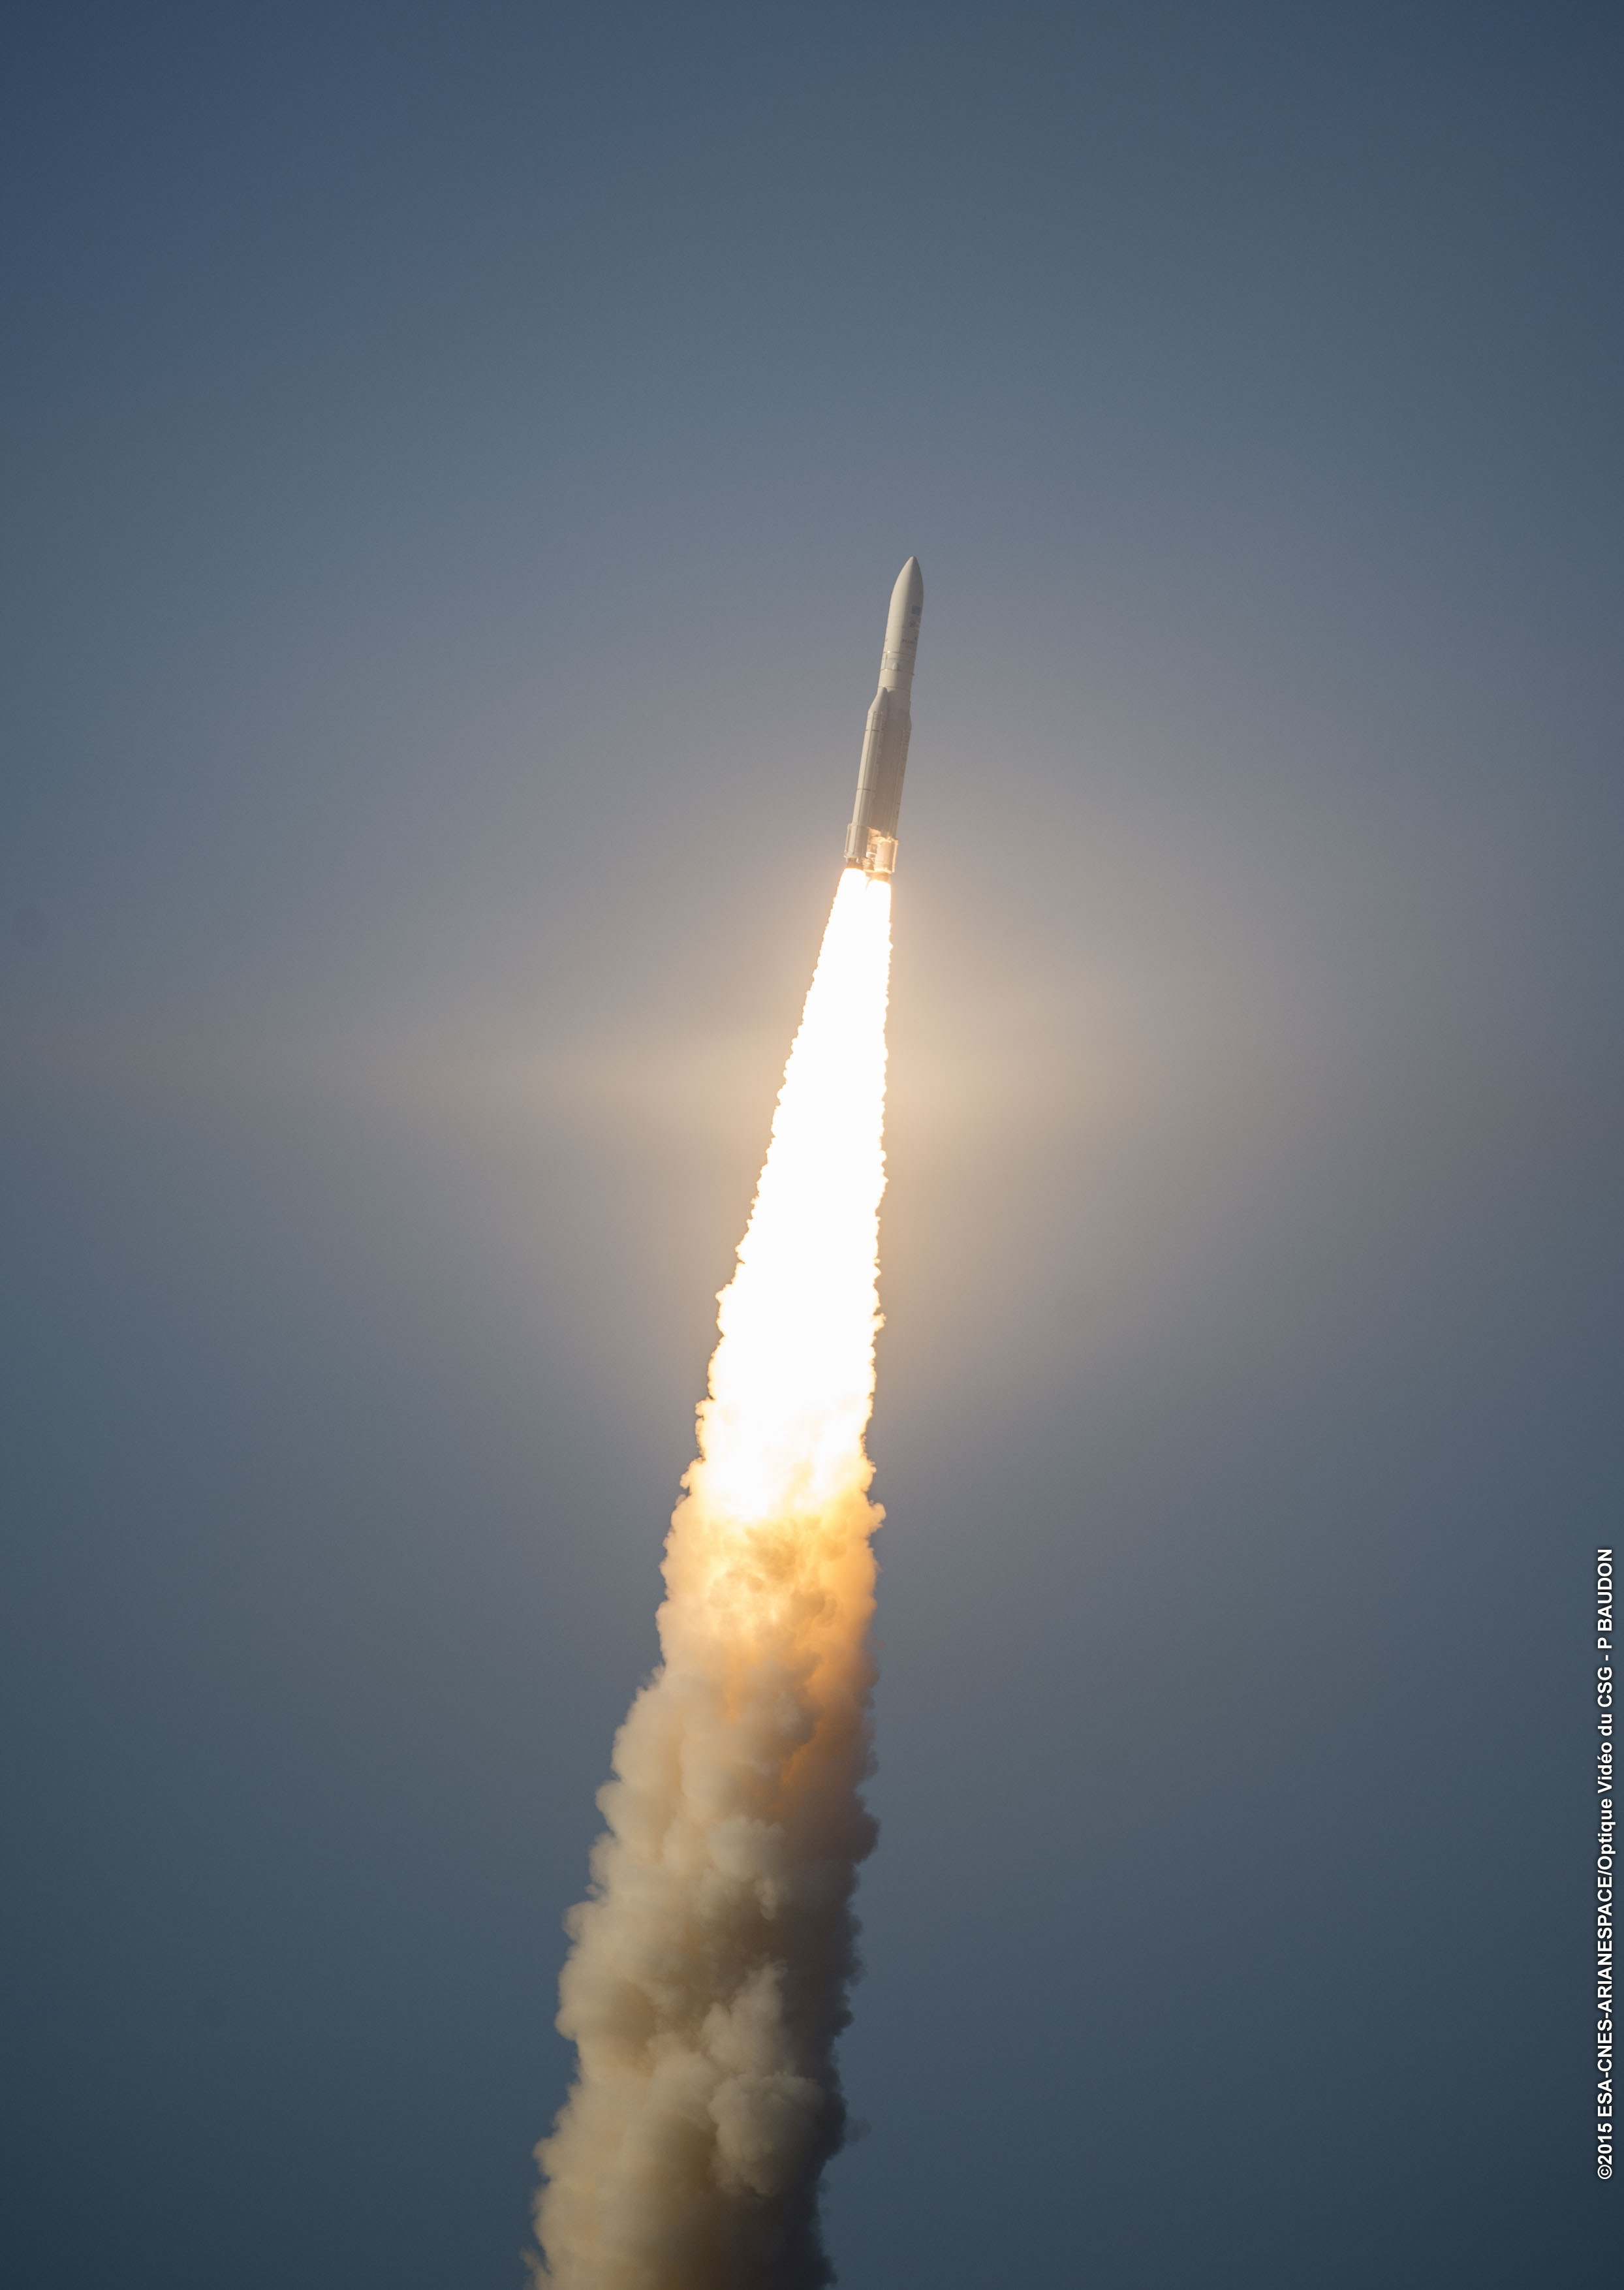 Lift-off for first nbn satellite